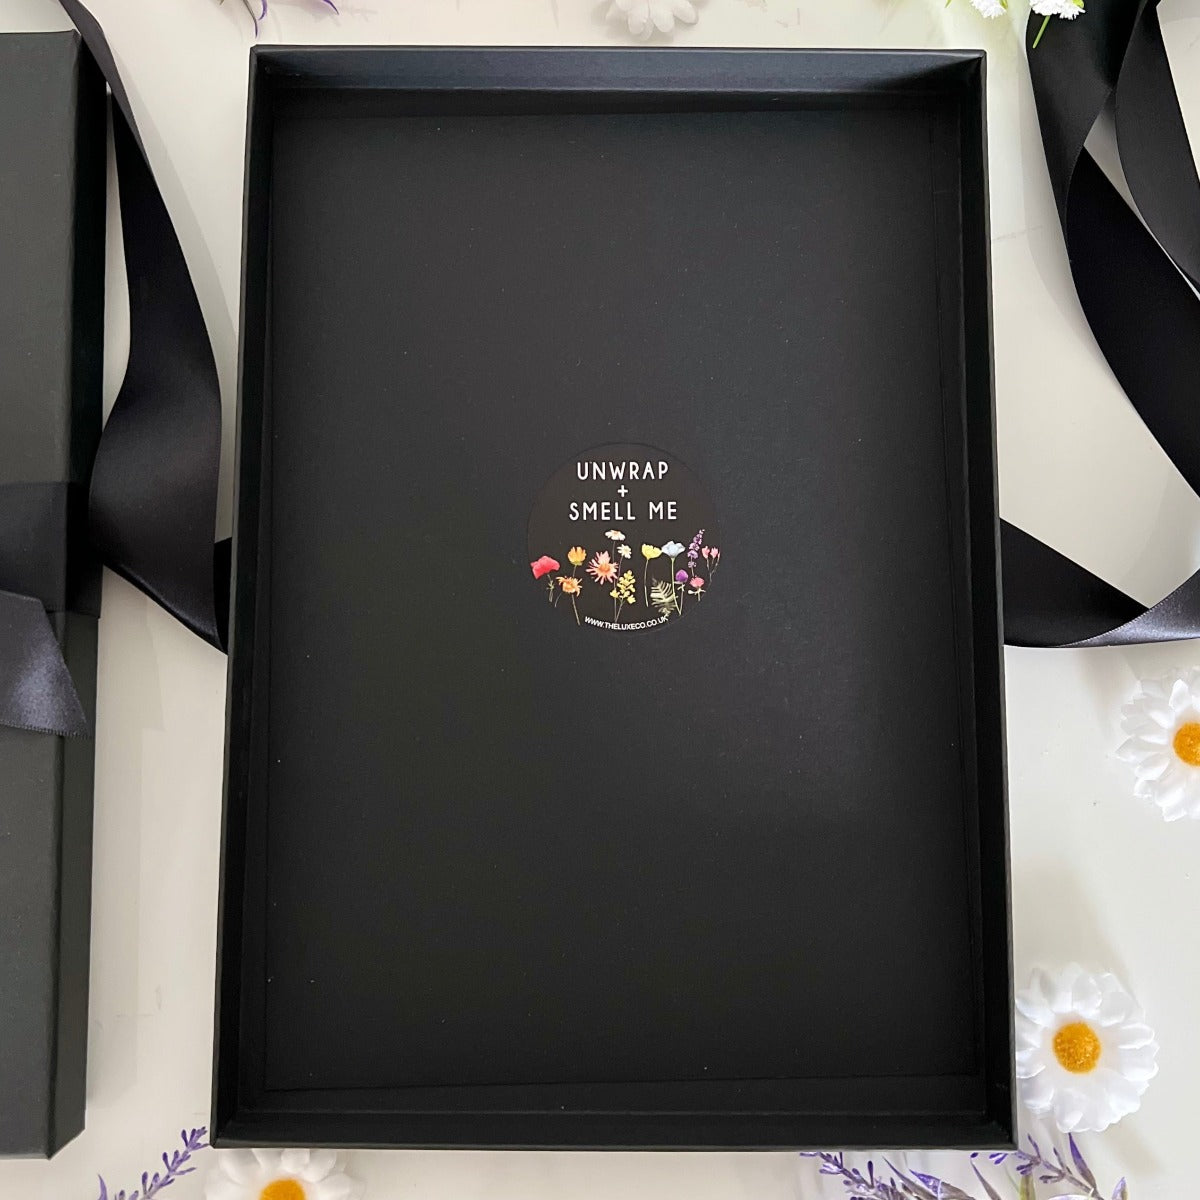 Calla Lily cards come boxed in beautiful black gift box